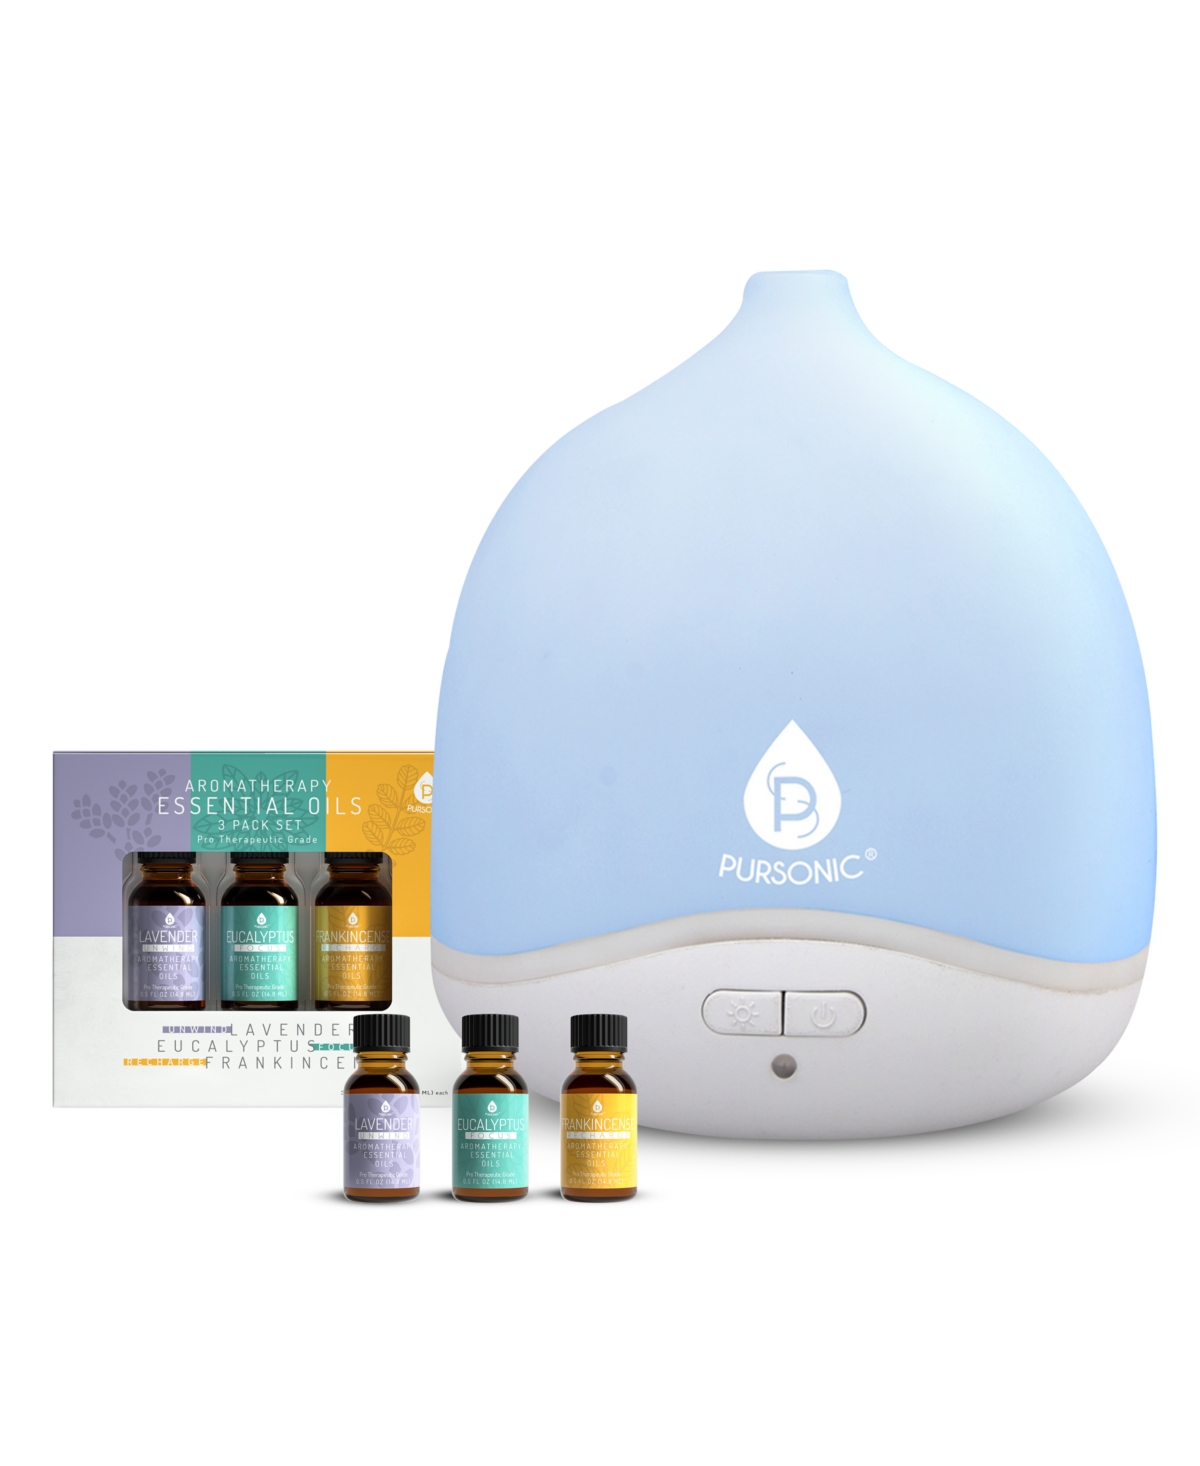 Usb & Battery-Operated Waterless Aroma Diffuser with Luxurious 3-Pack of Essential Oils - Light blue